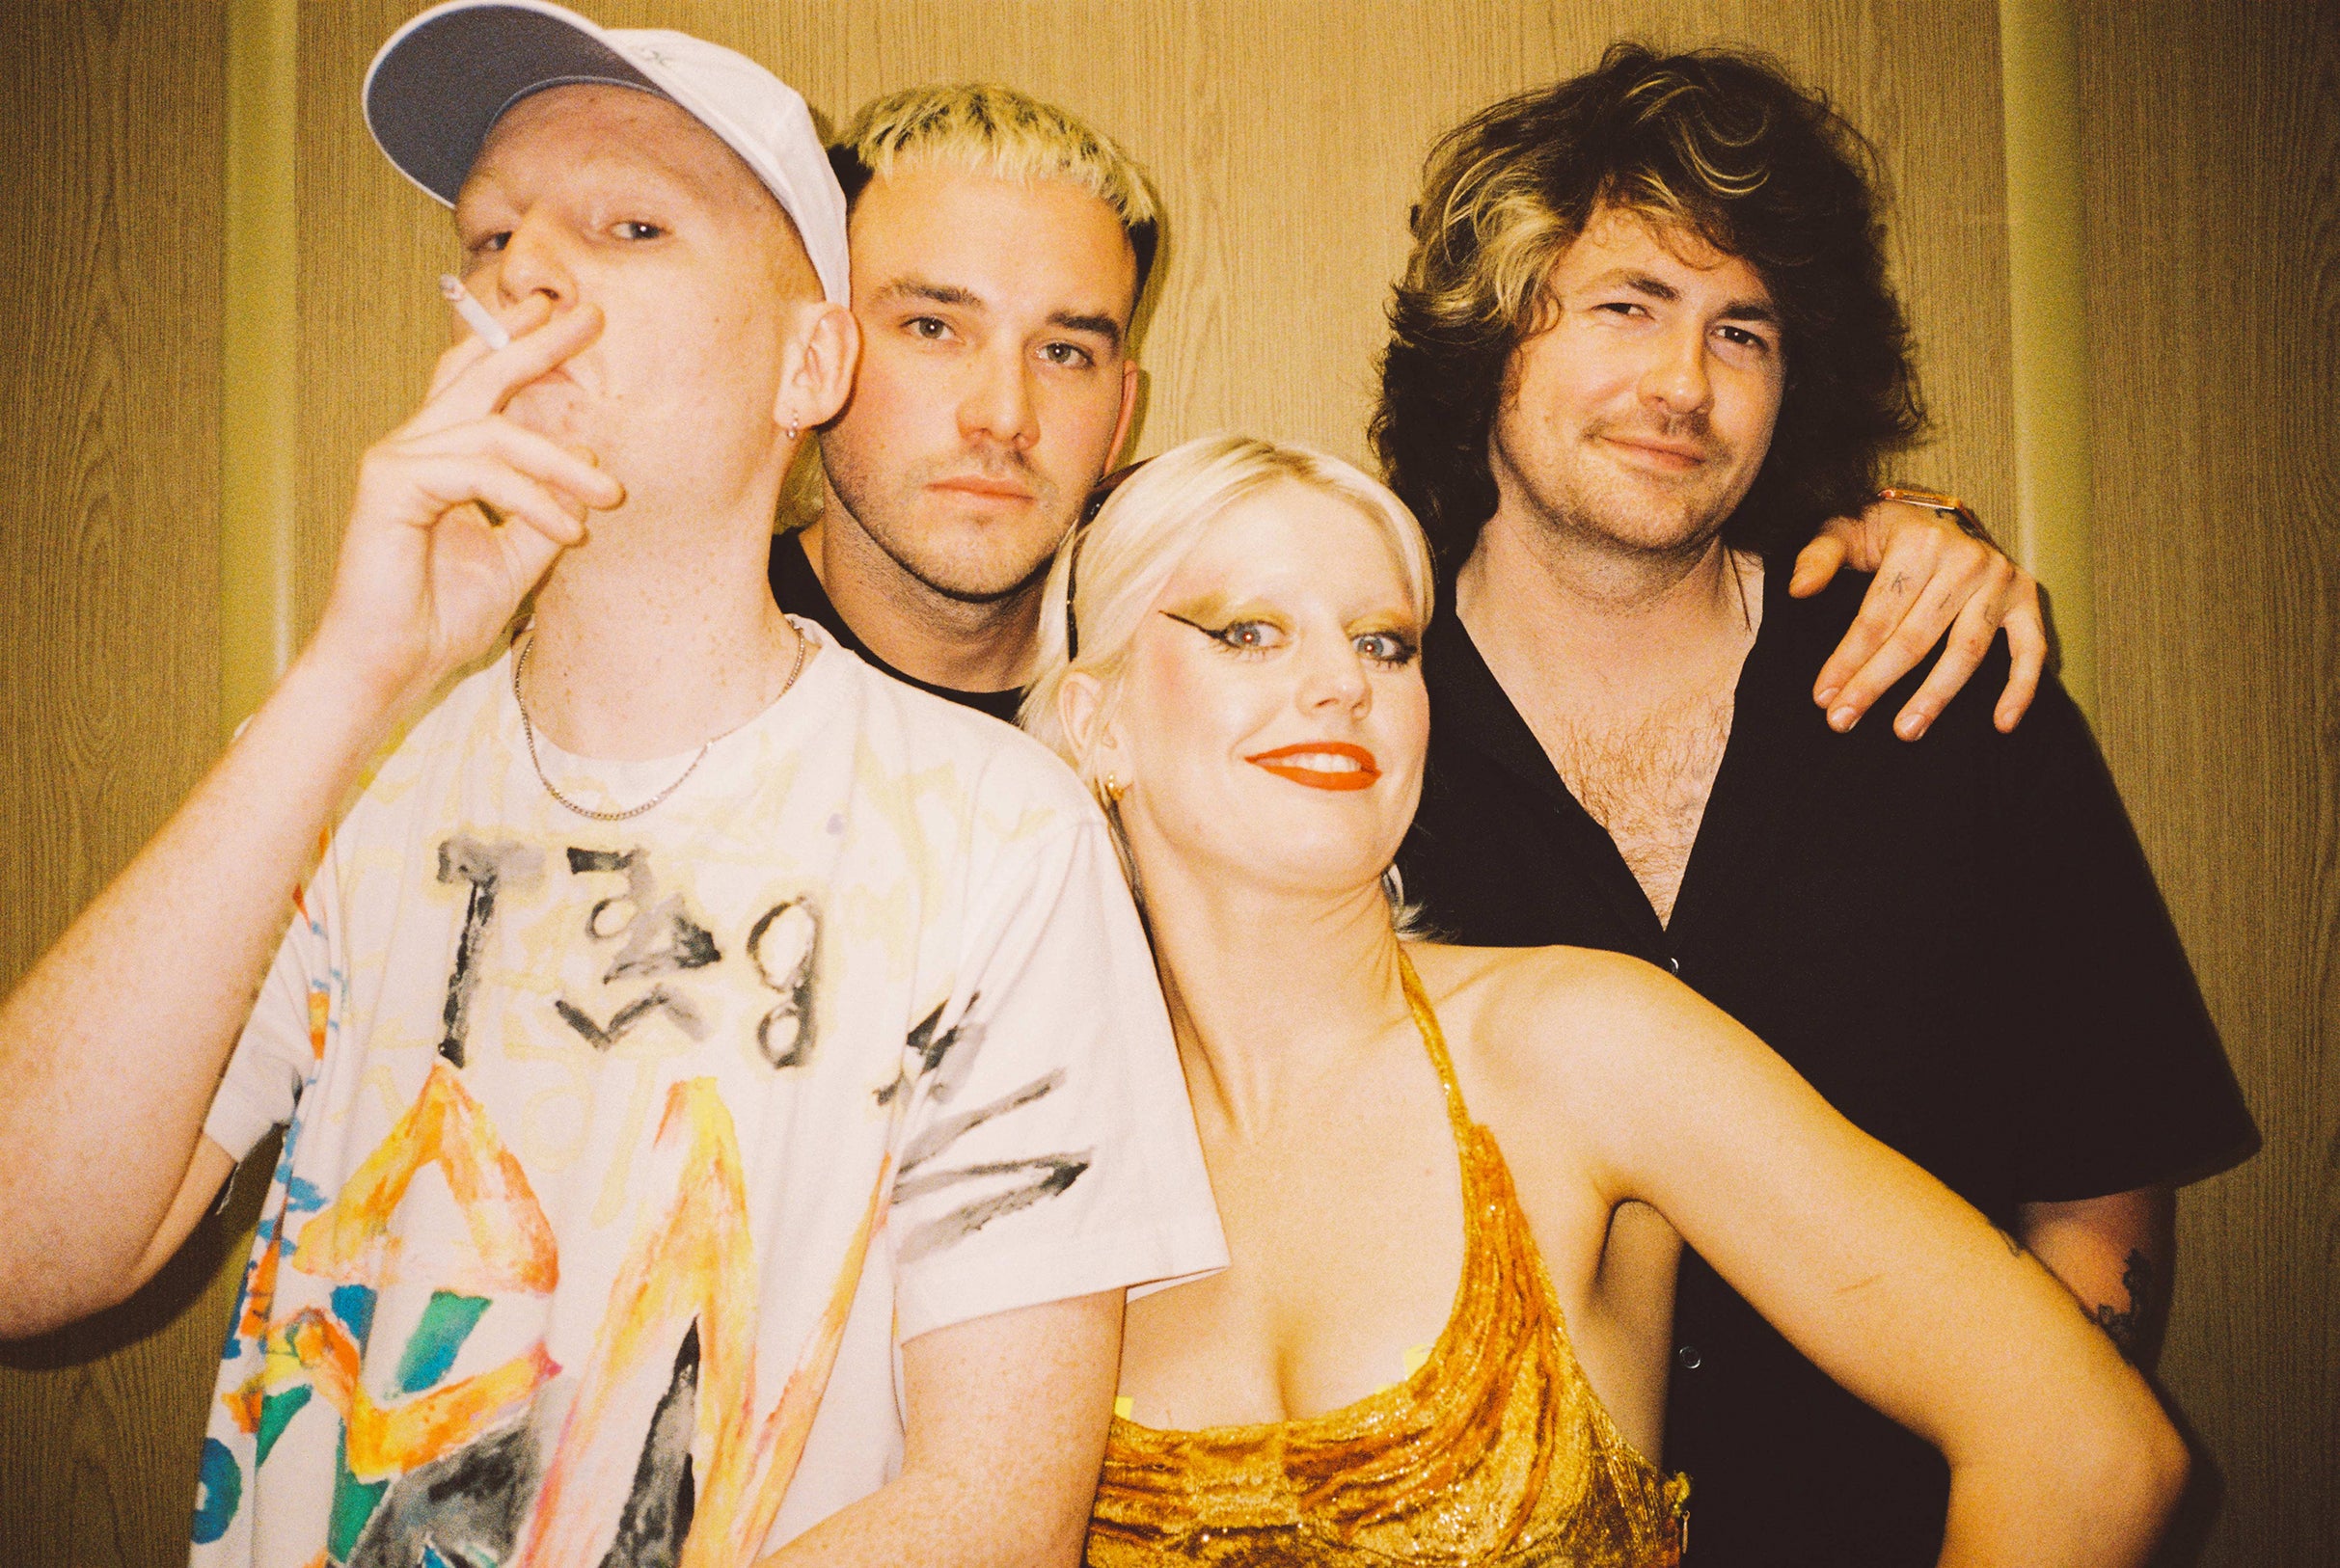 Amyl and the Sniffers in Del Mar promo photo for Artist presale offer code